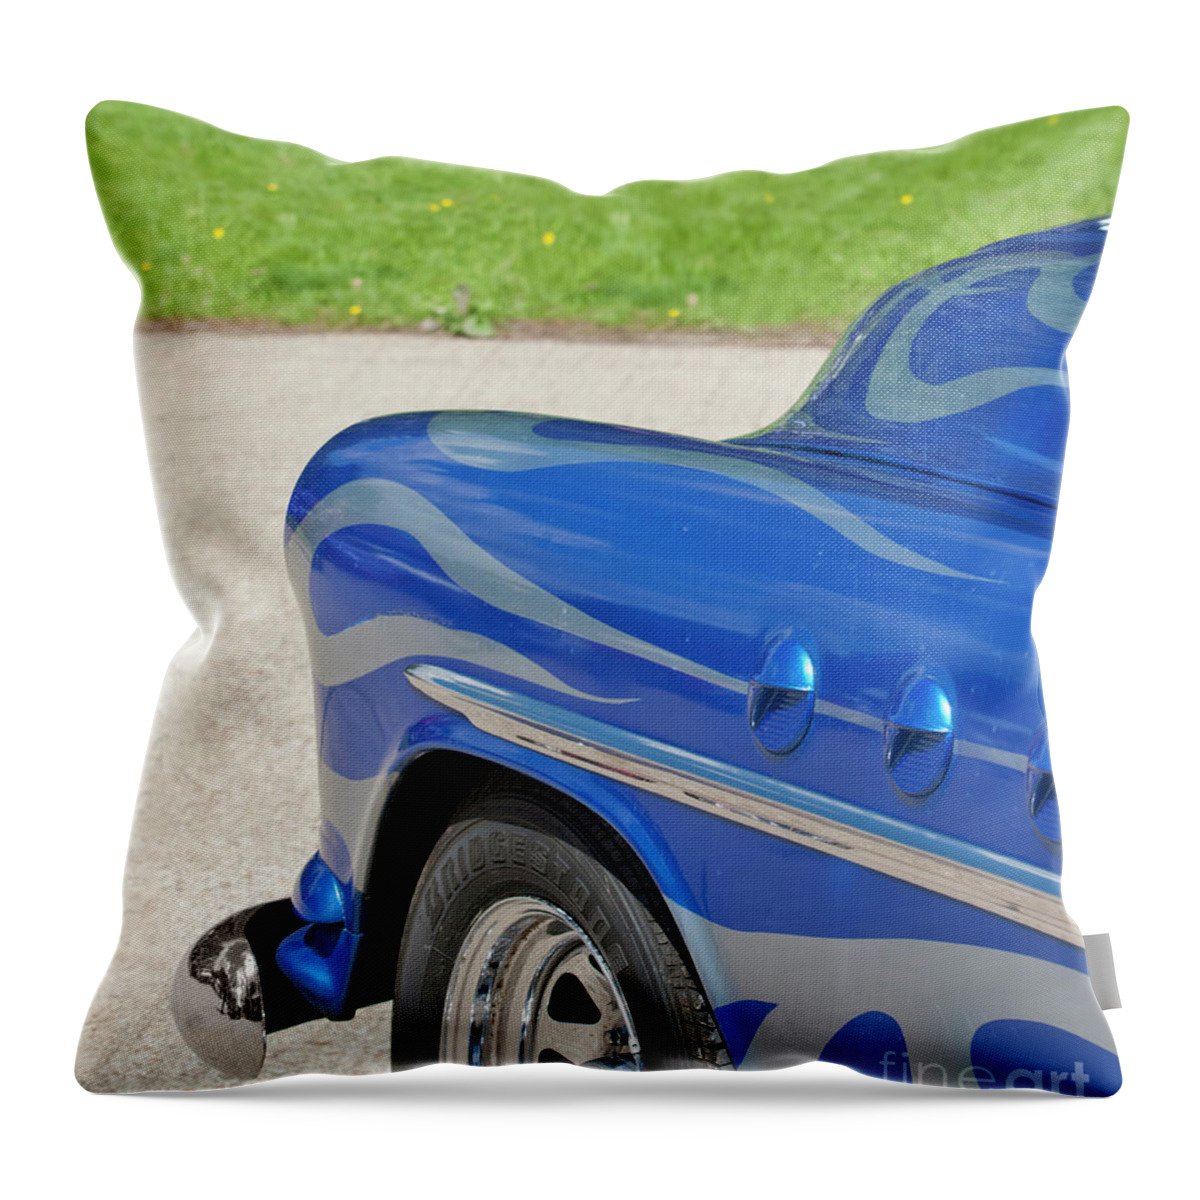 Hot Rod Throw Pillow featuring the photograph 1951 Buick Hot Rod Style by Terri Waters